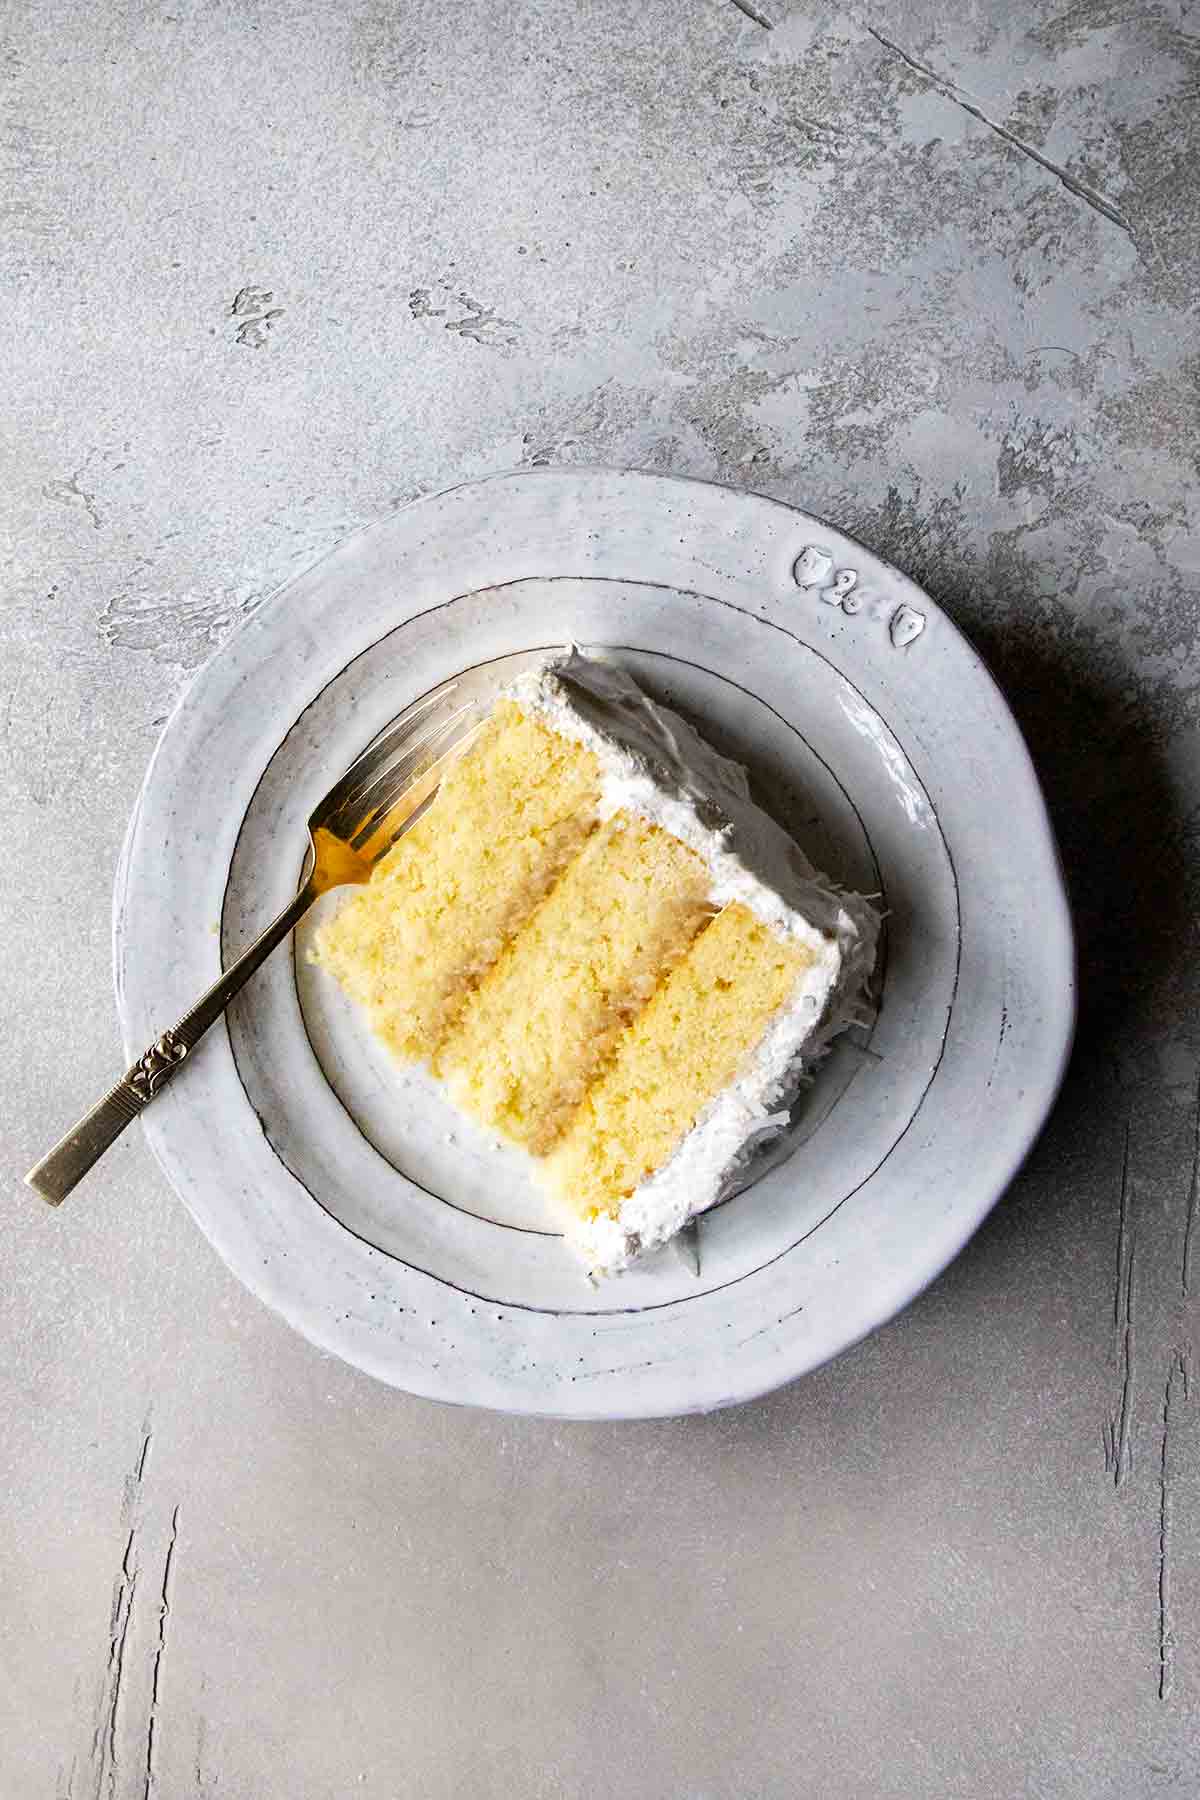 A slice of a three-layer coconut cake with white frosting on a gray plate.